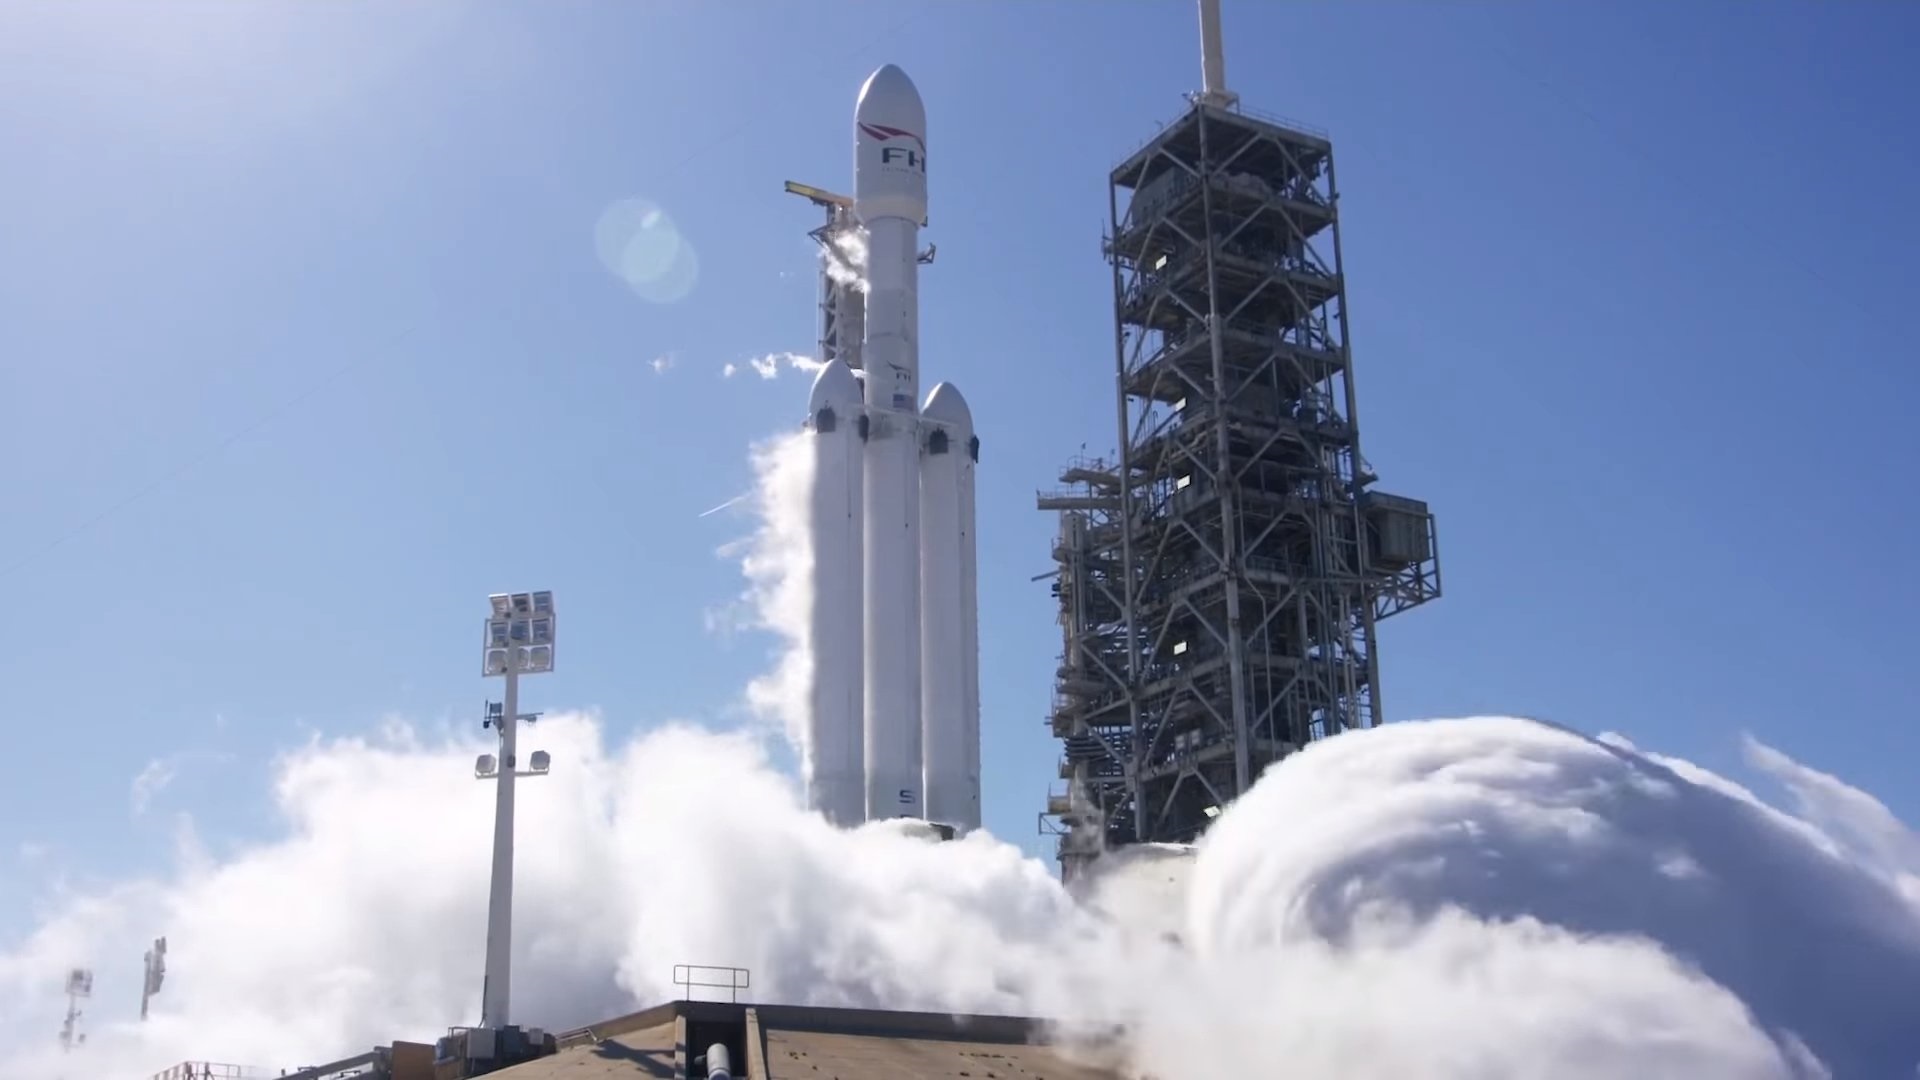 SpaceX successfully launched the Falcon Heavy missile, but when landing there were problems